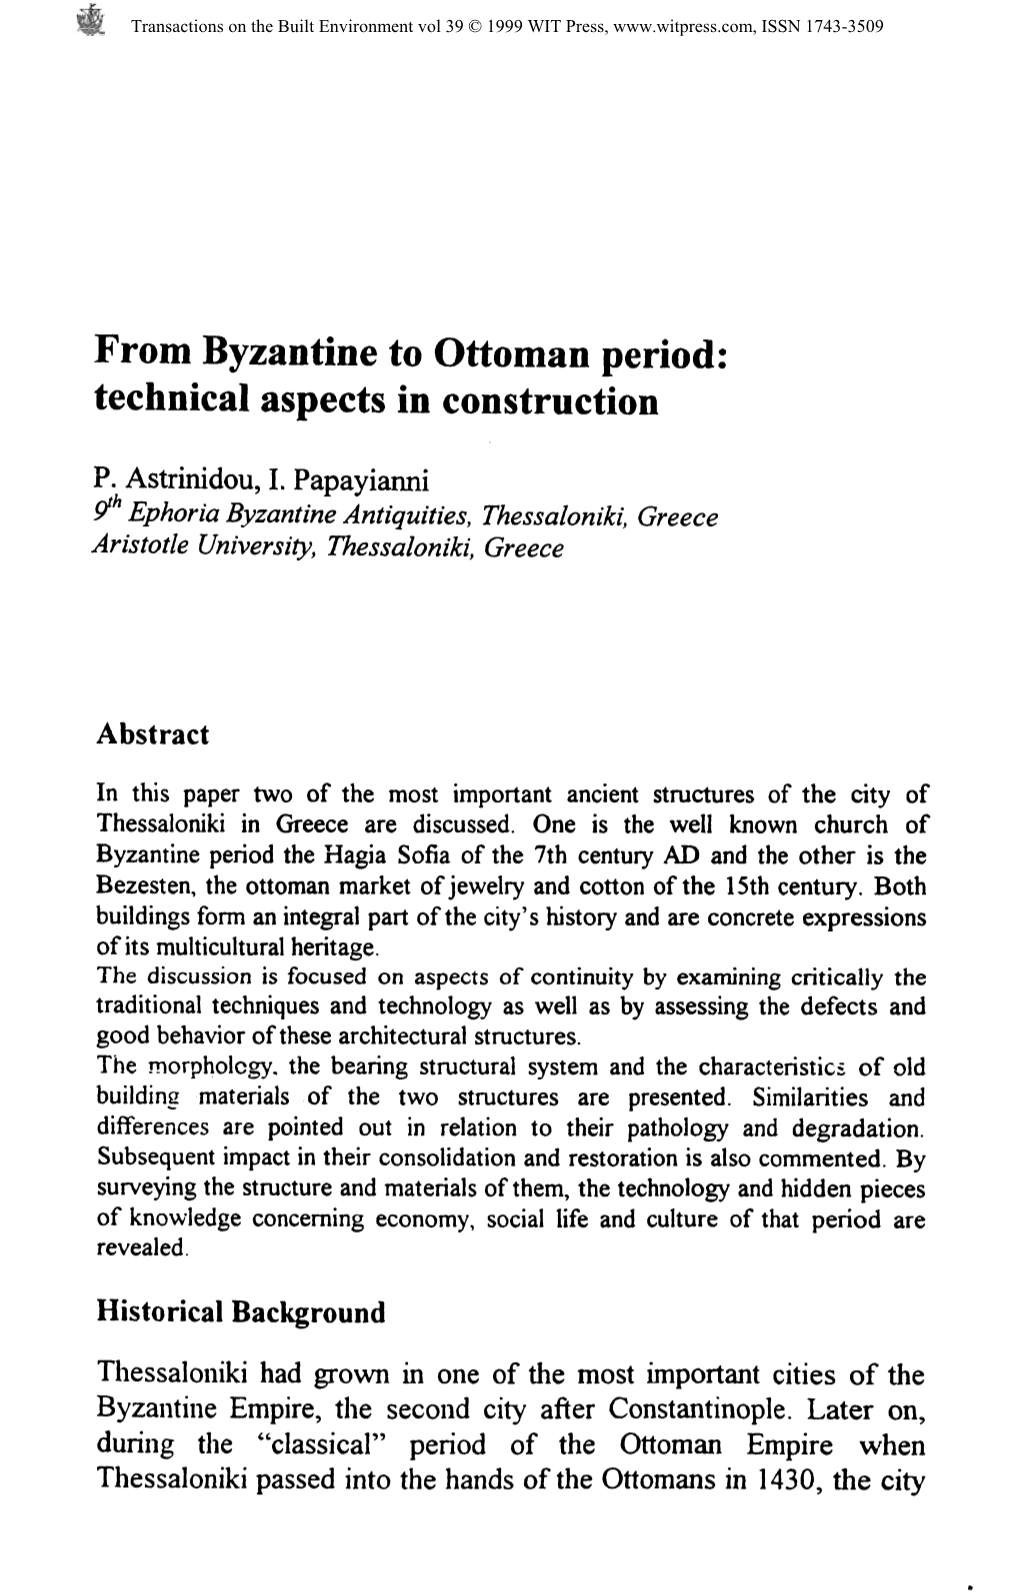 From Byzantine to Ottoman Period: Technical Aspects in Construction